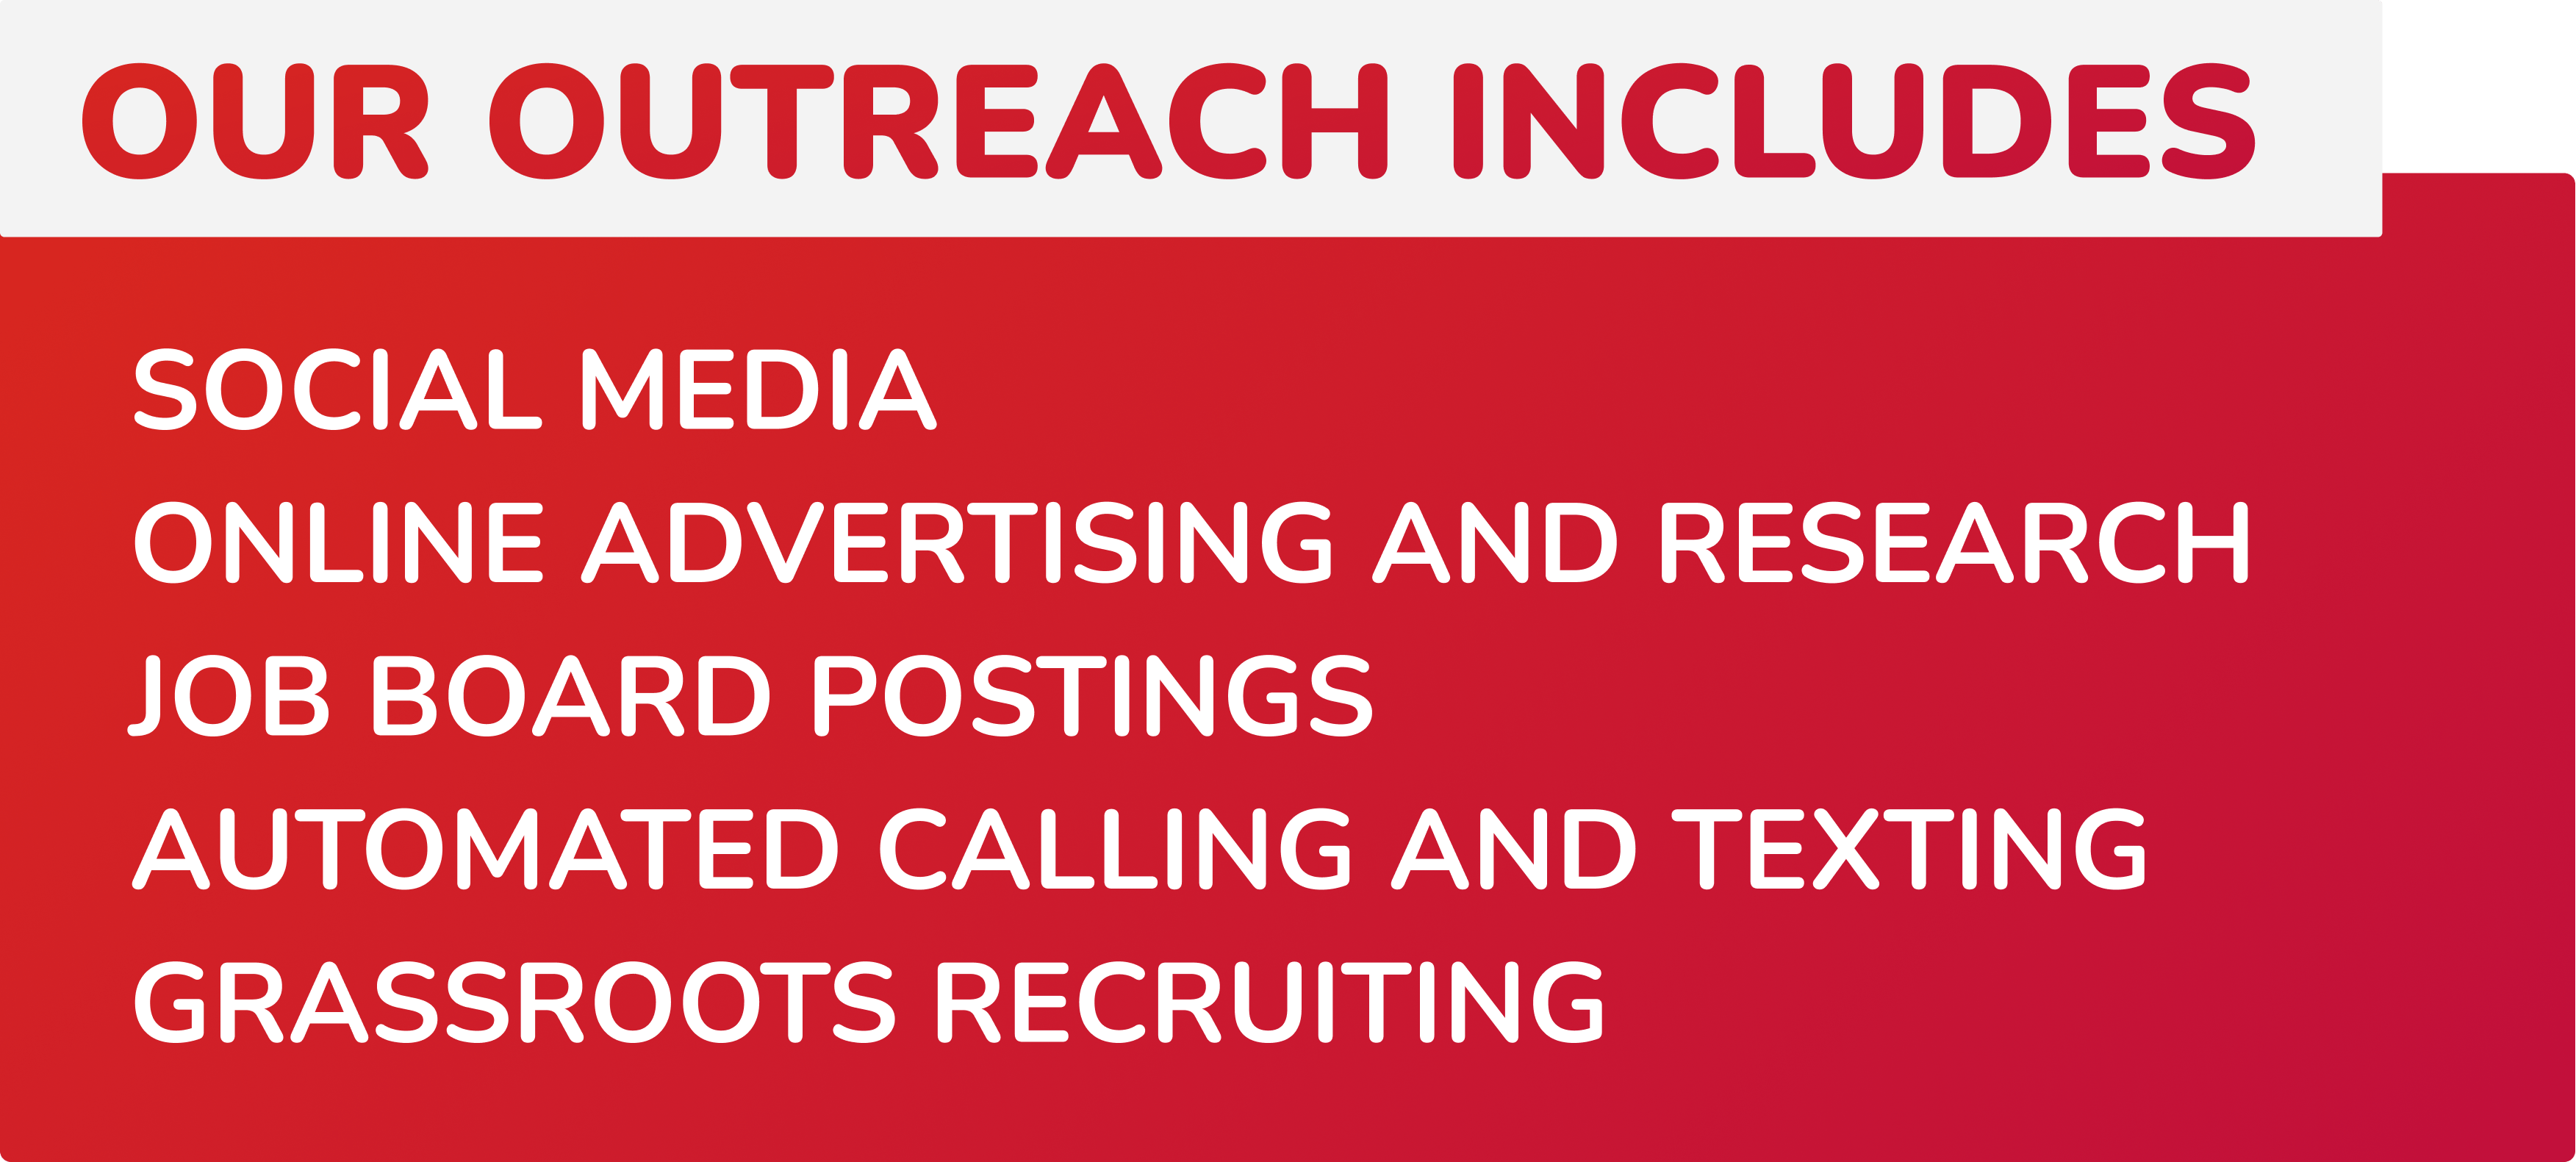 Our outreach includes: Social media, Online advertising and research, Job board postings, Automated calling and texting, Grassroots recruiting